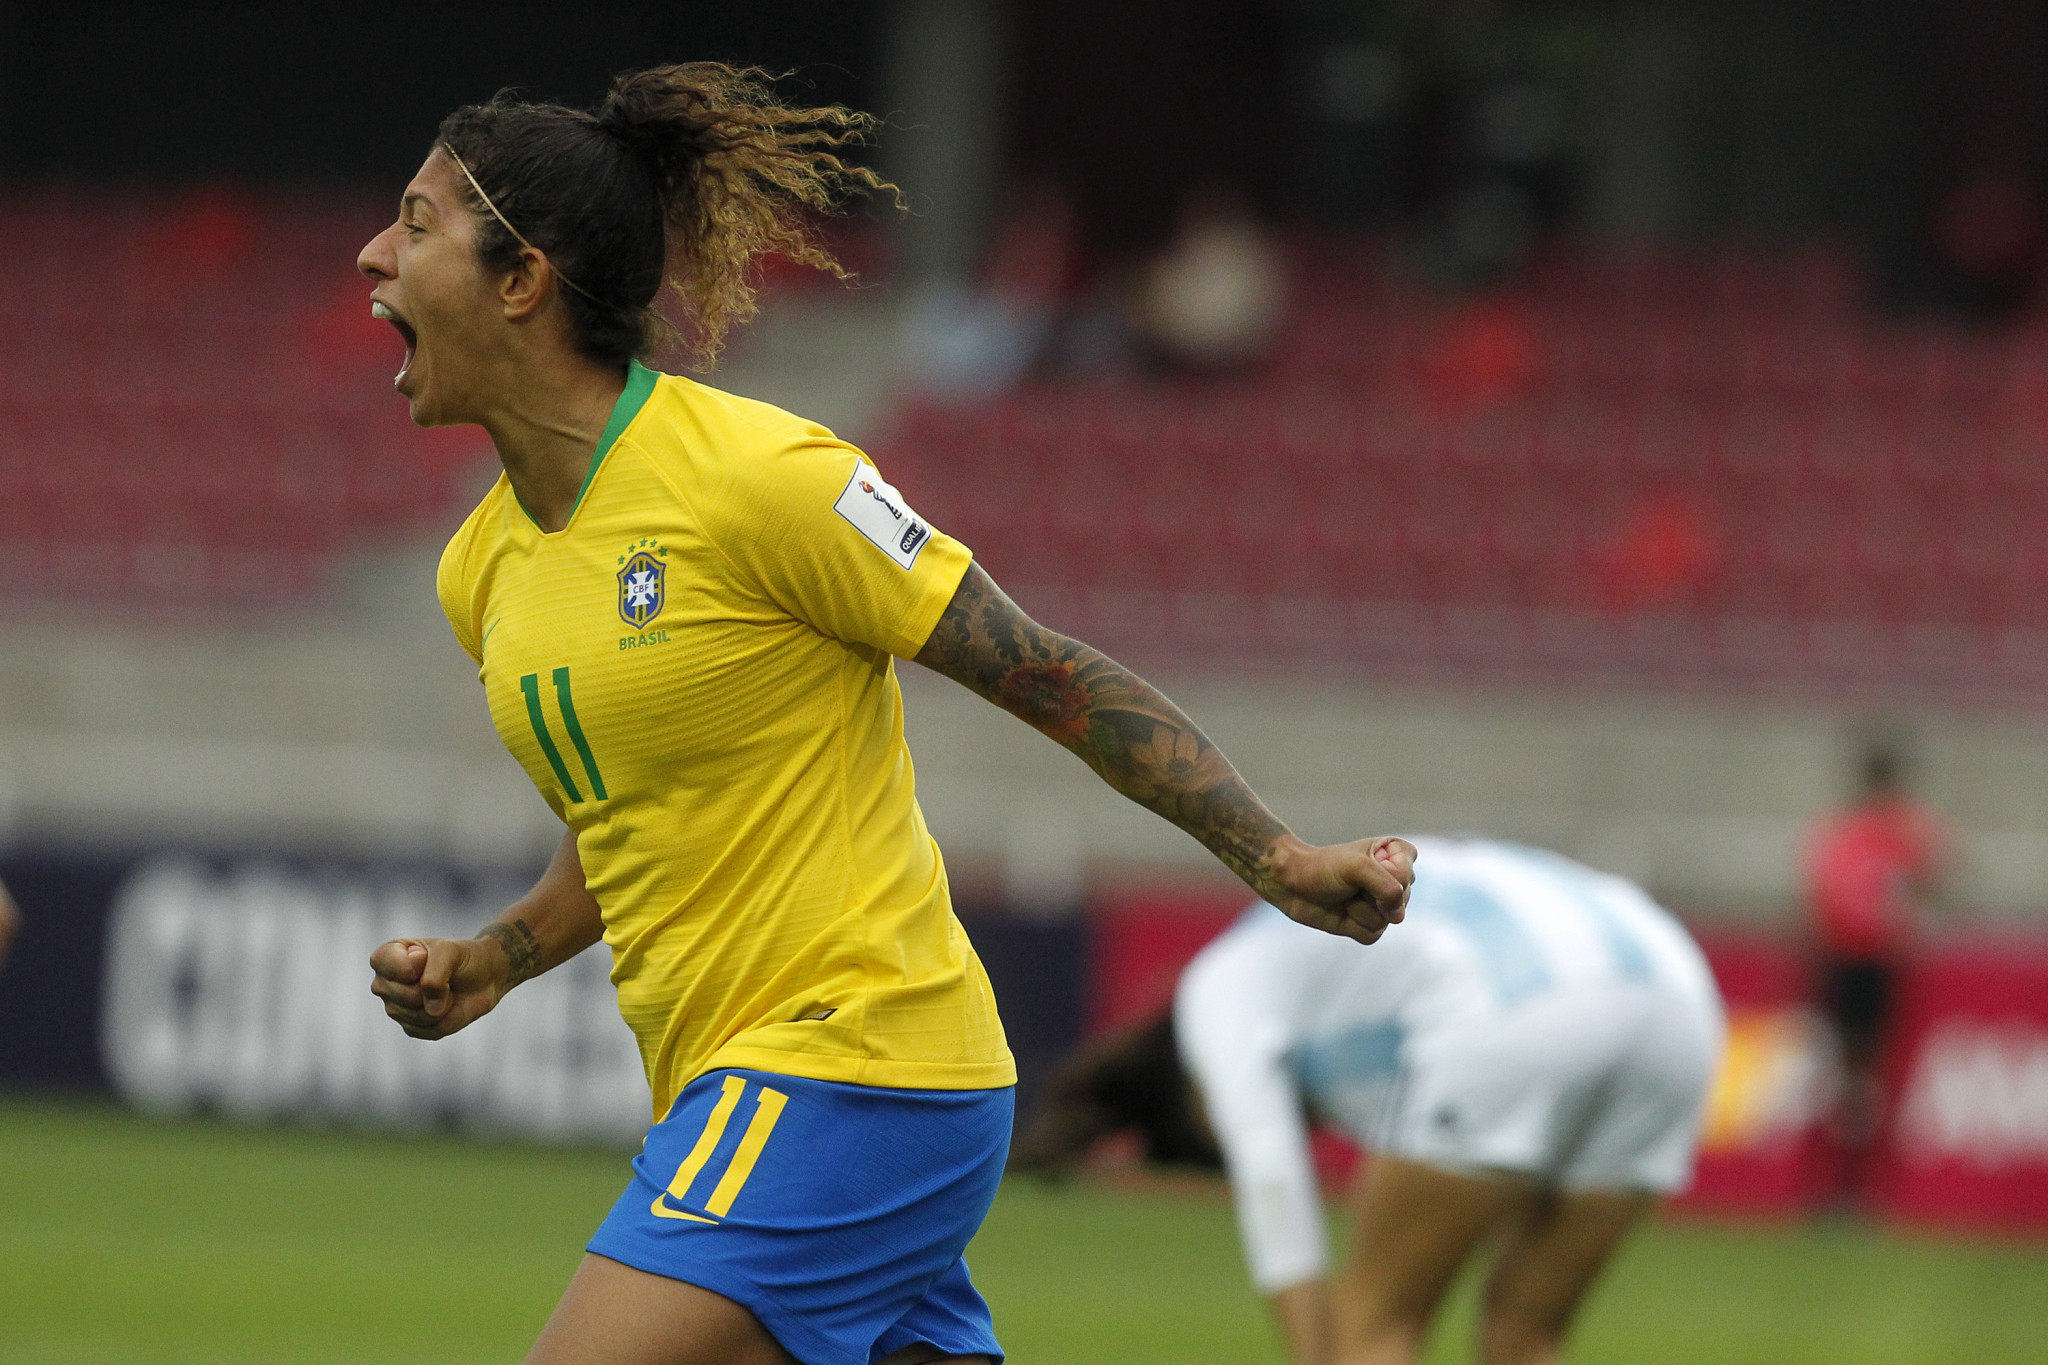 Cristiane scored Brazil's first goal in their 3-0 victory over Argentina to qualify for next year's FIFA World Cup ©Getty Images